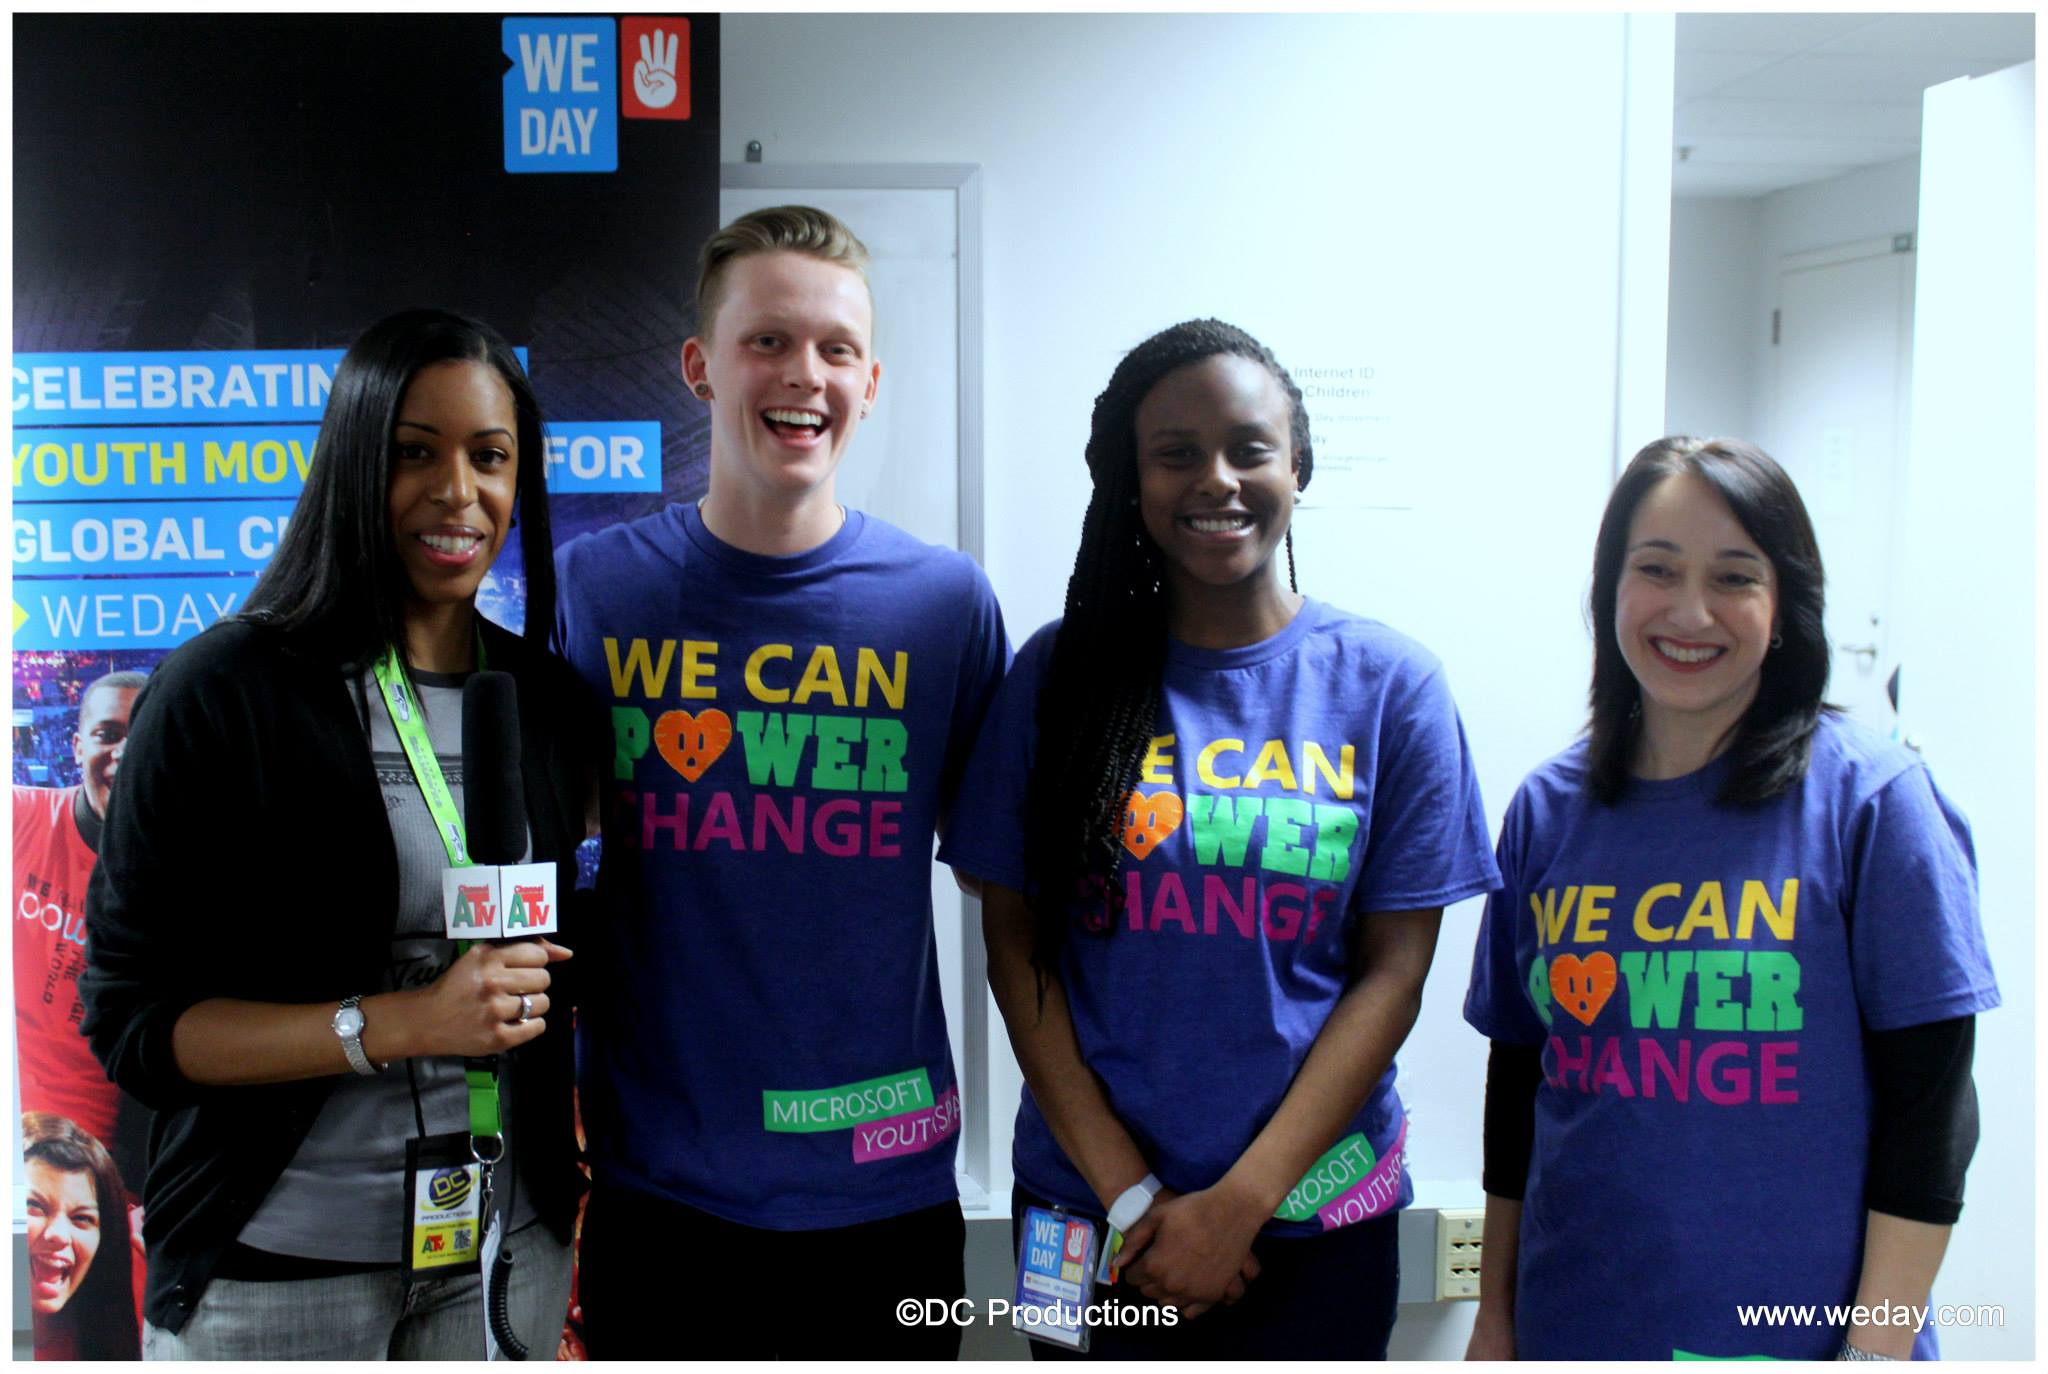 Microsoft YouthSpark at “We Day” Seattle 2014